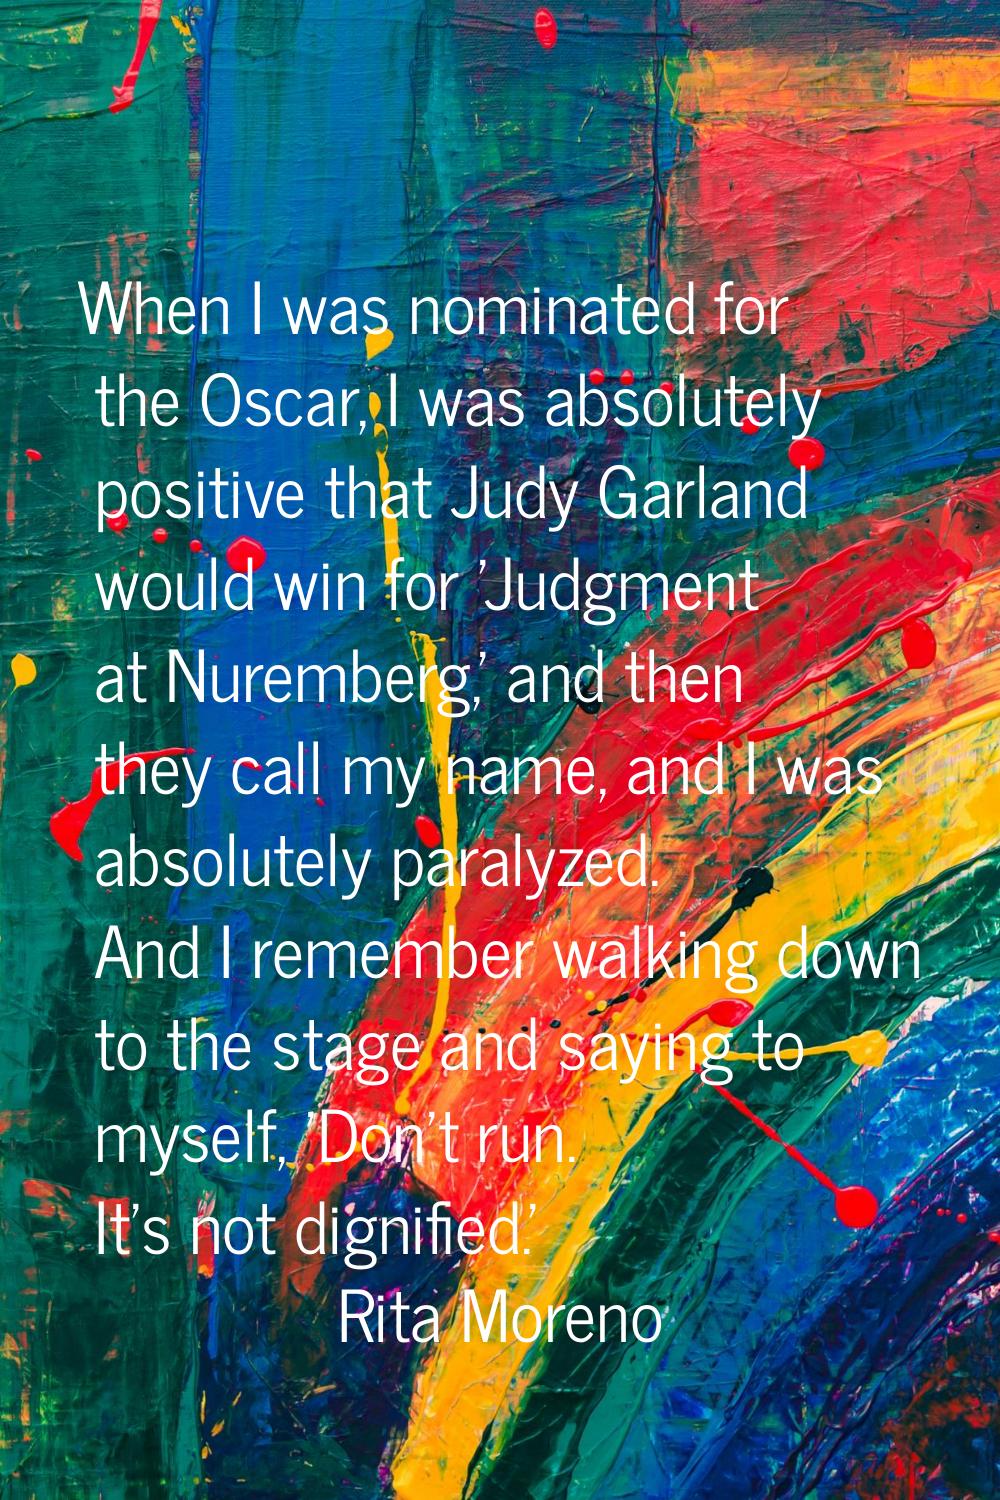 When I was nominated for the Oscar, I was absolutely positive that Judy Garland would win for 'Judg